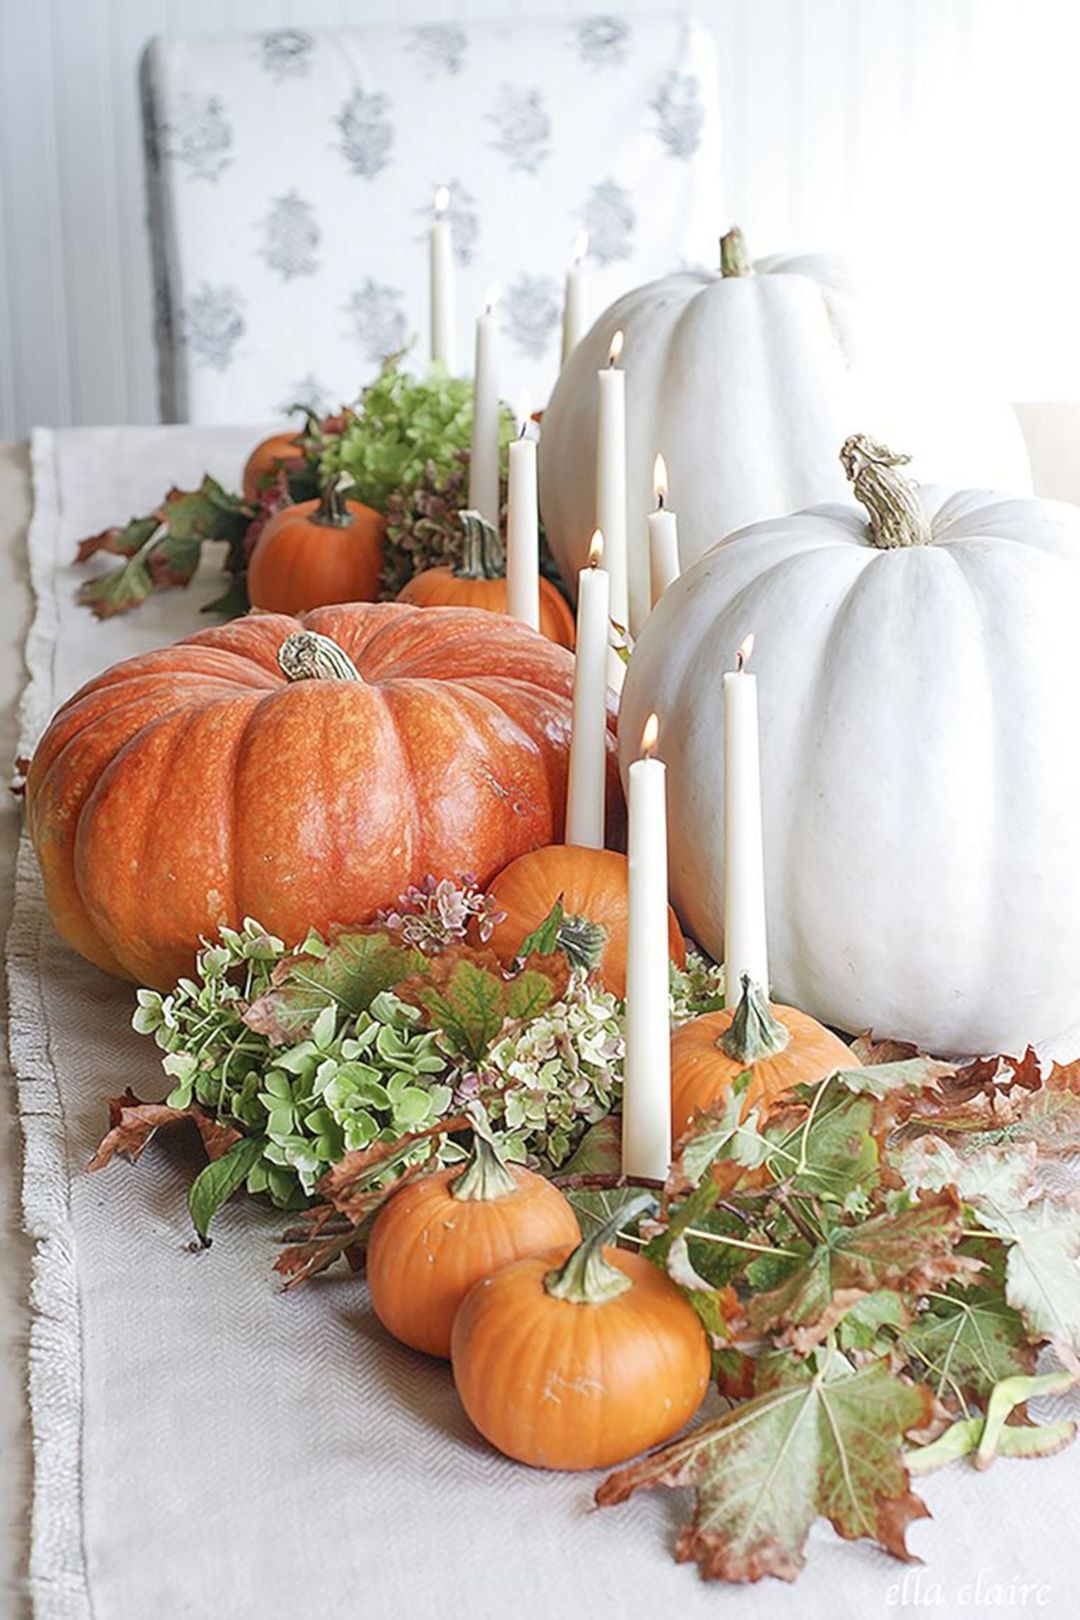 Glowing Gourds from Countryliving